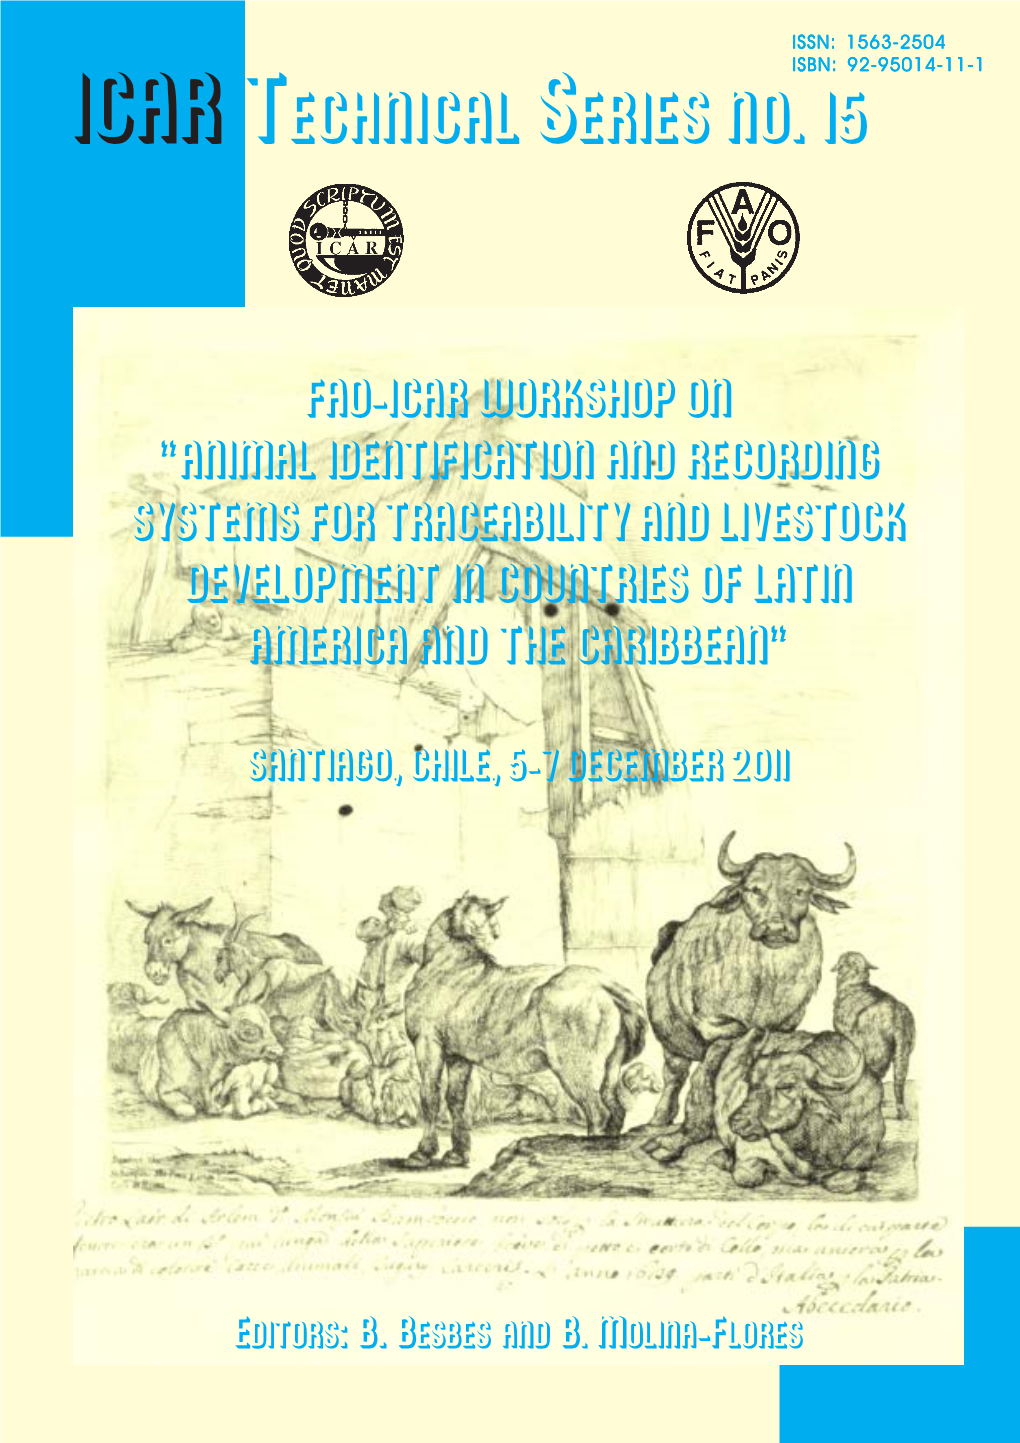 FAO-ICAR Workshop on "Animal Identification and Recording Systems for Traceability and Livestock Development in Countries of Latin America and the Caribbean"